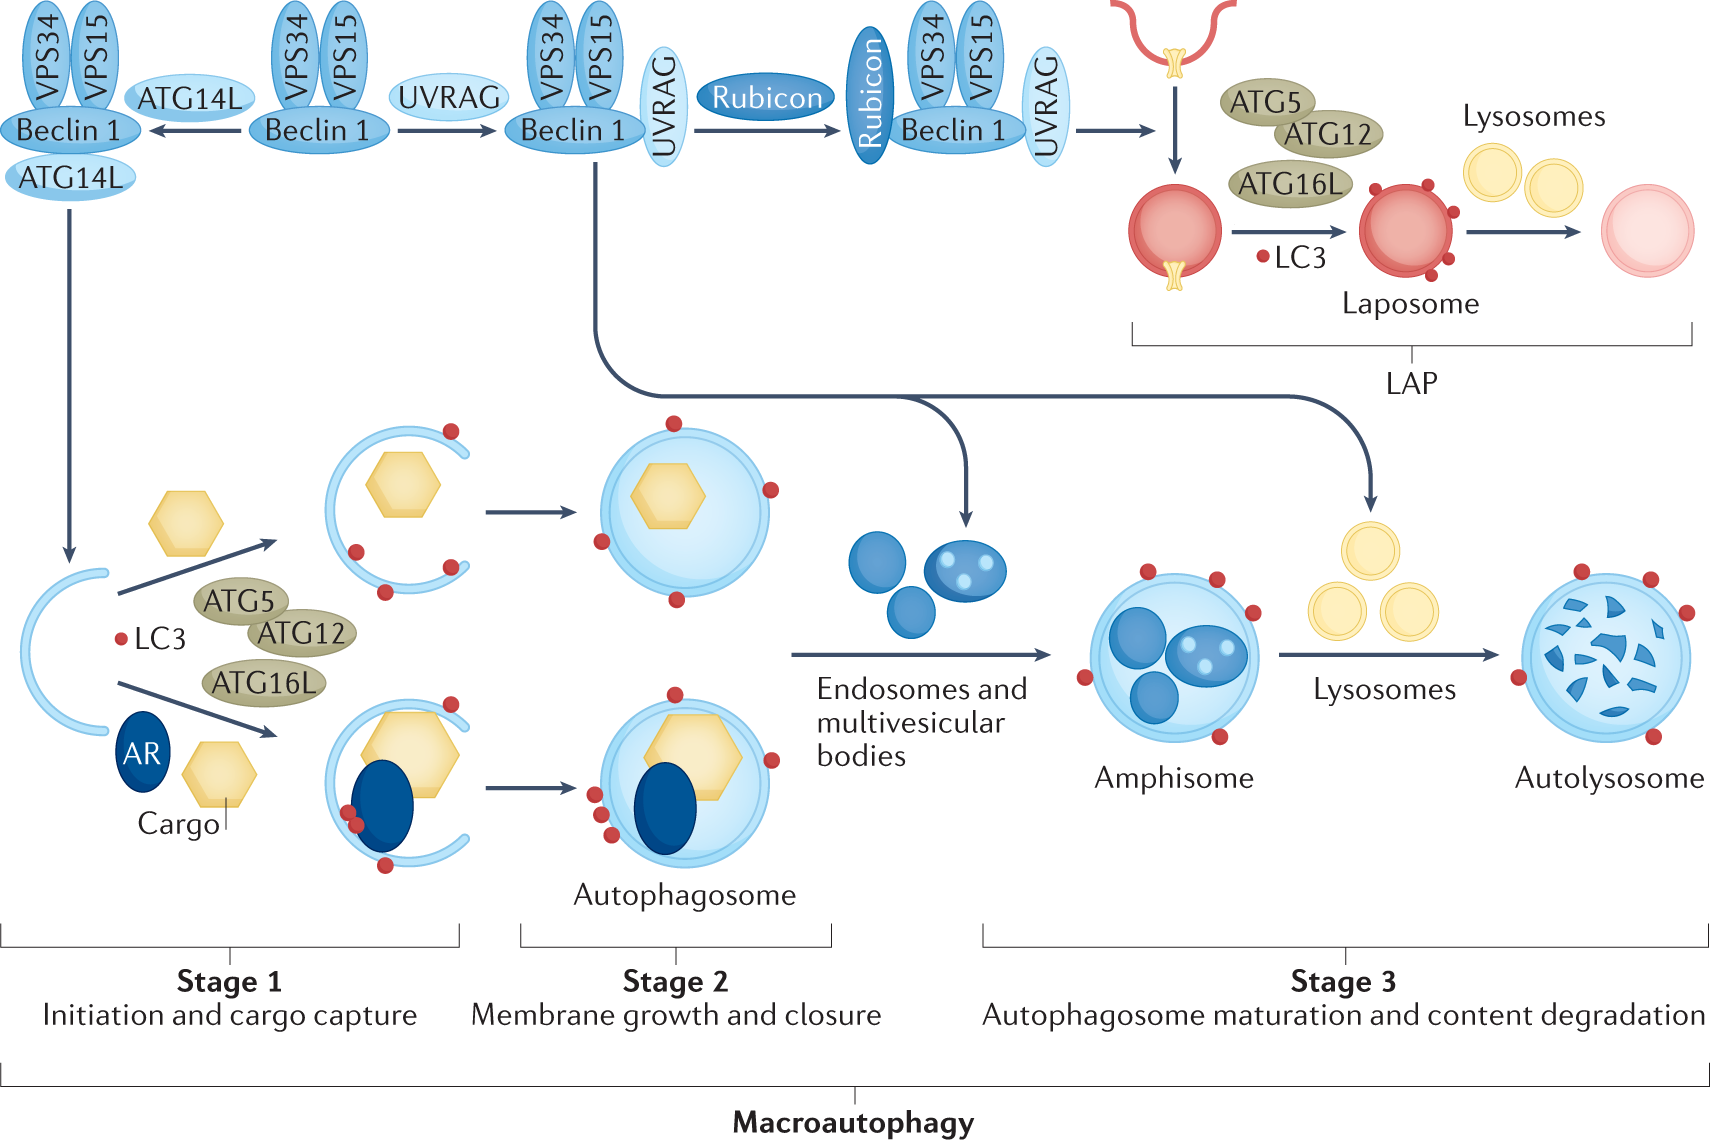 Macroautophagy in CNS health and disease | Nature Reviews Neuroscience